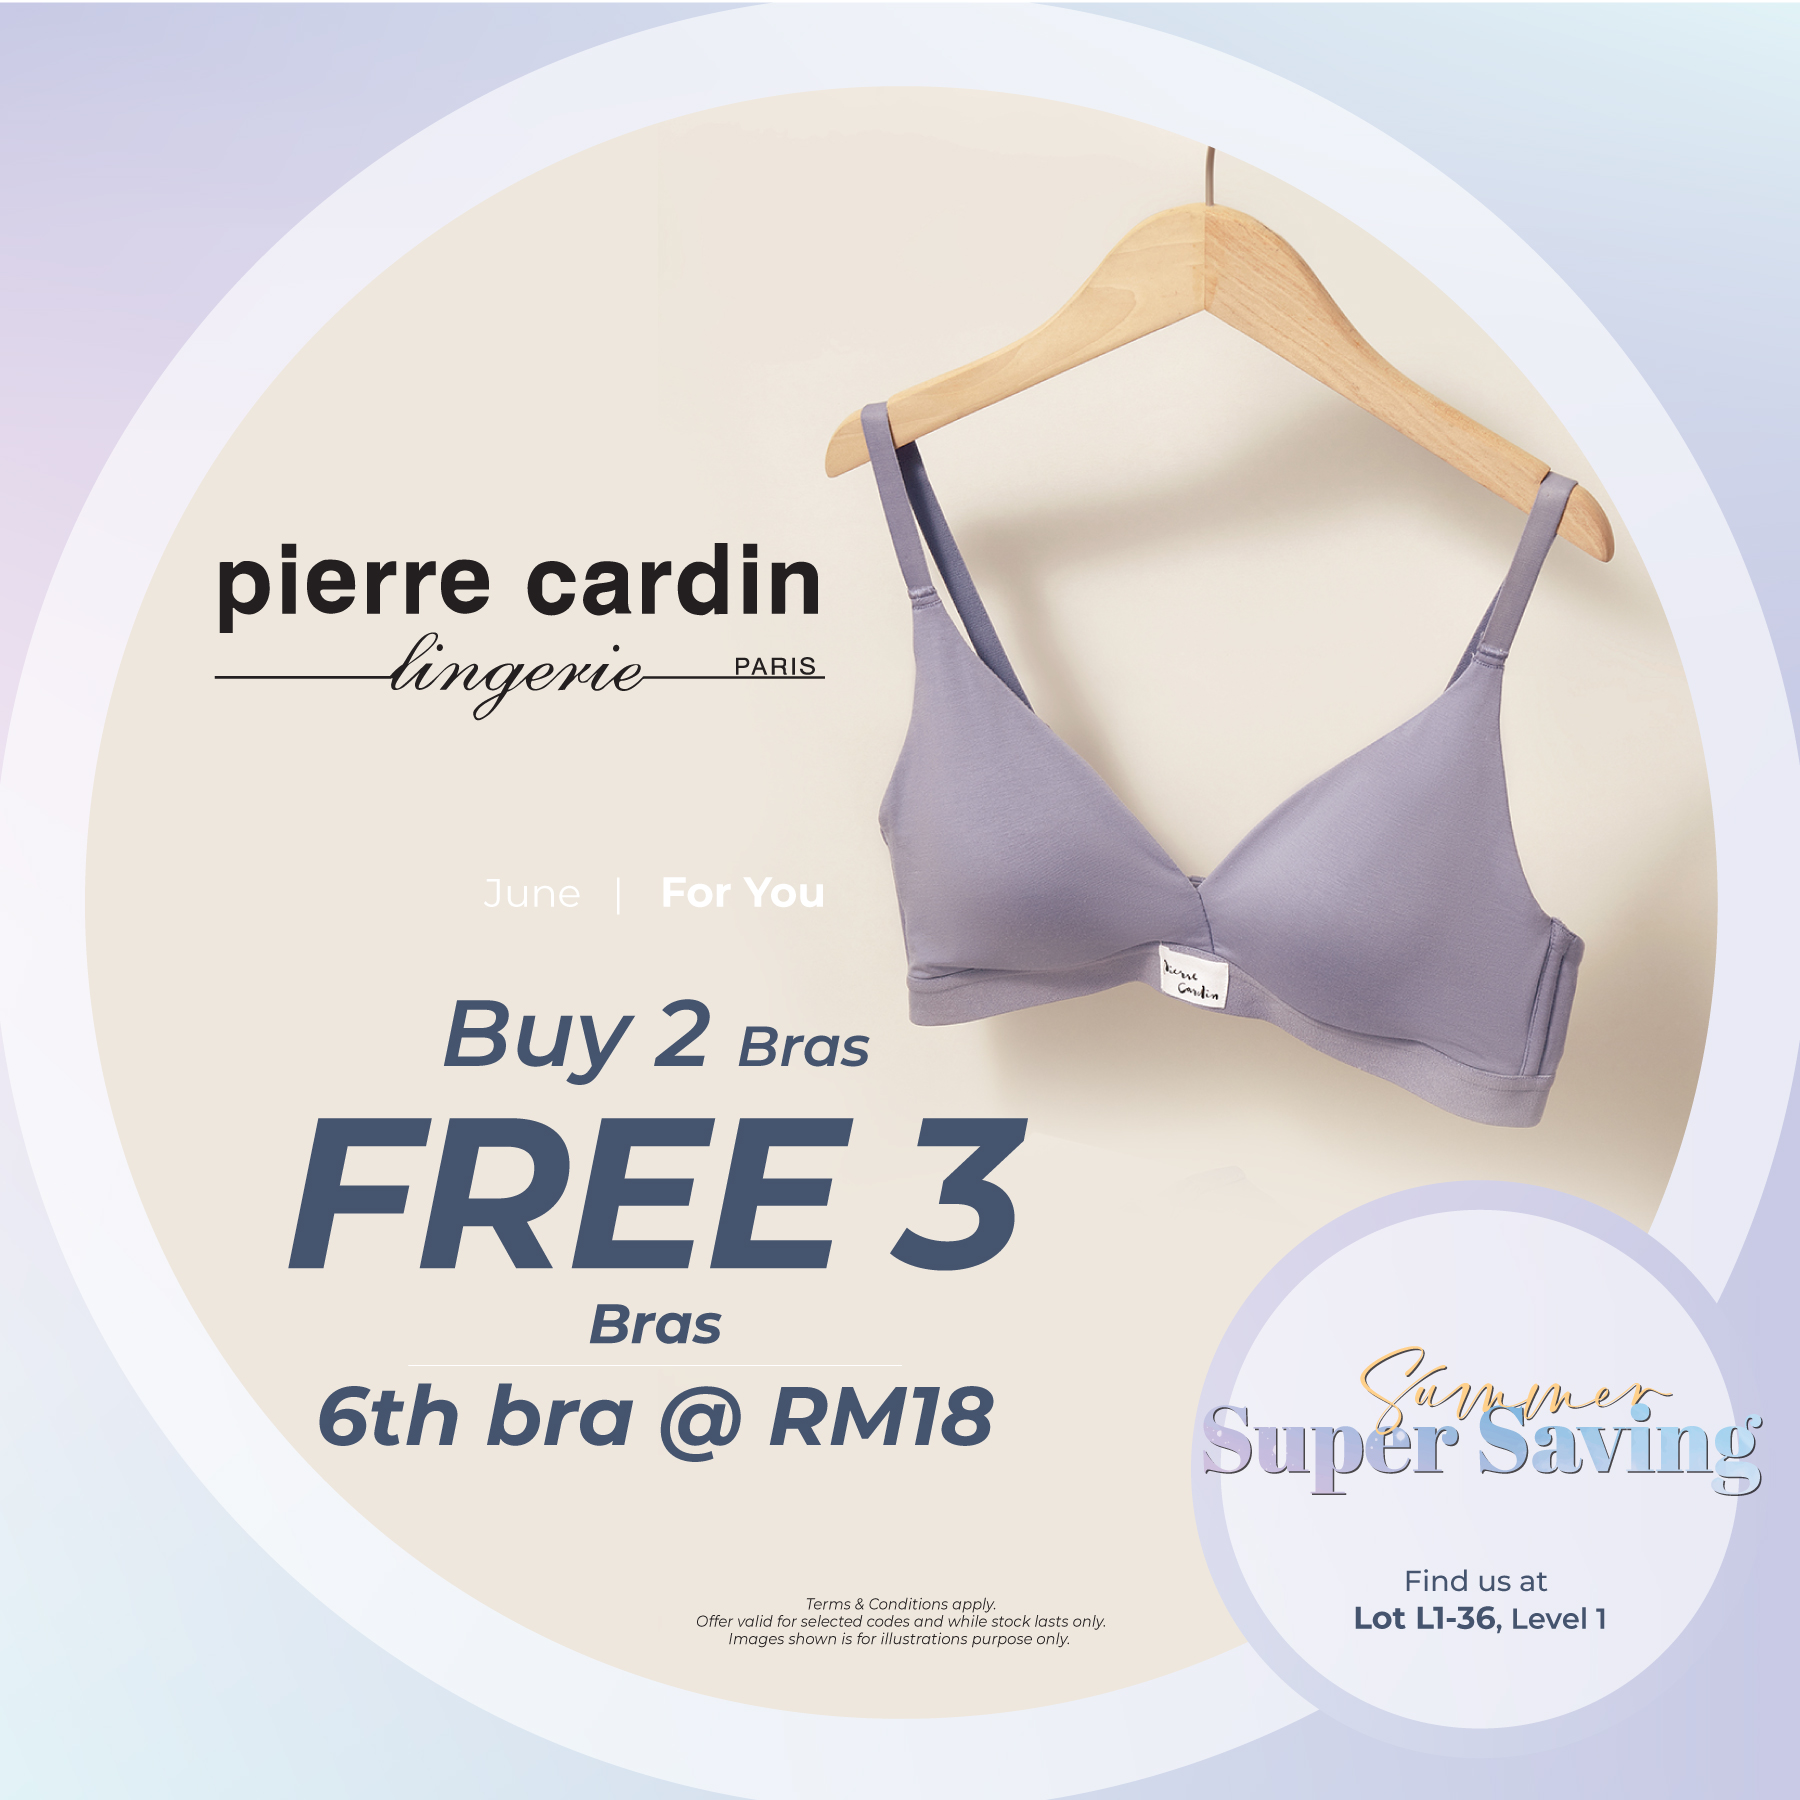 Mitsui Outlet Park KLIA Sepang - NEW IN ENERGIZED SPORTS BRA @ RM19/pc for  the 3rd piece purchase in store. T&C apply. #pierrecardinlingeriemy  #pierrecardinmy